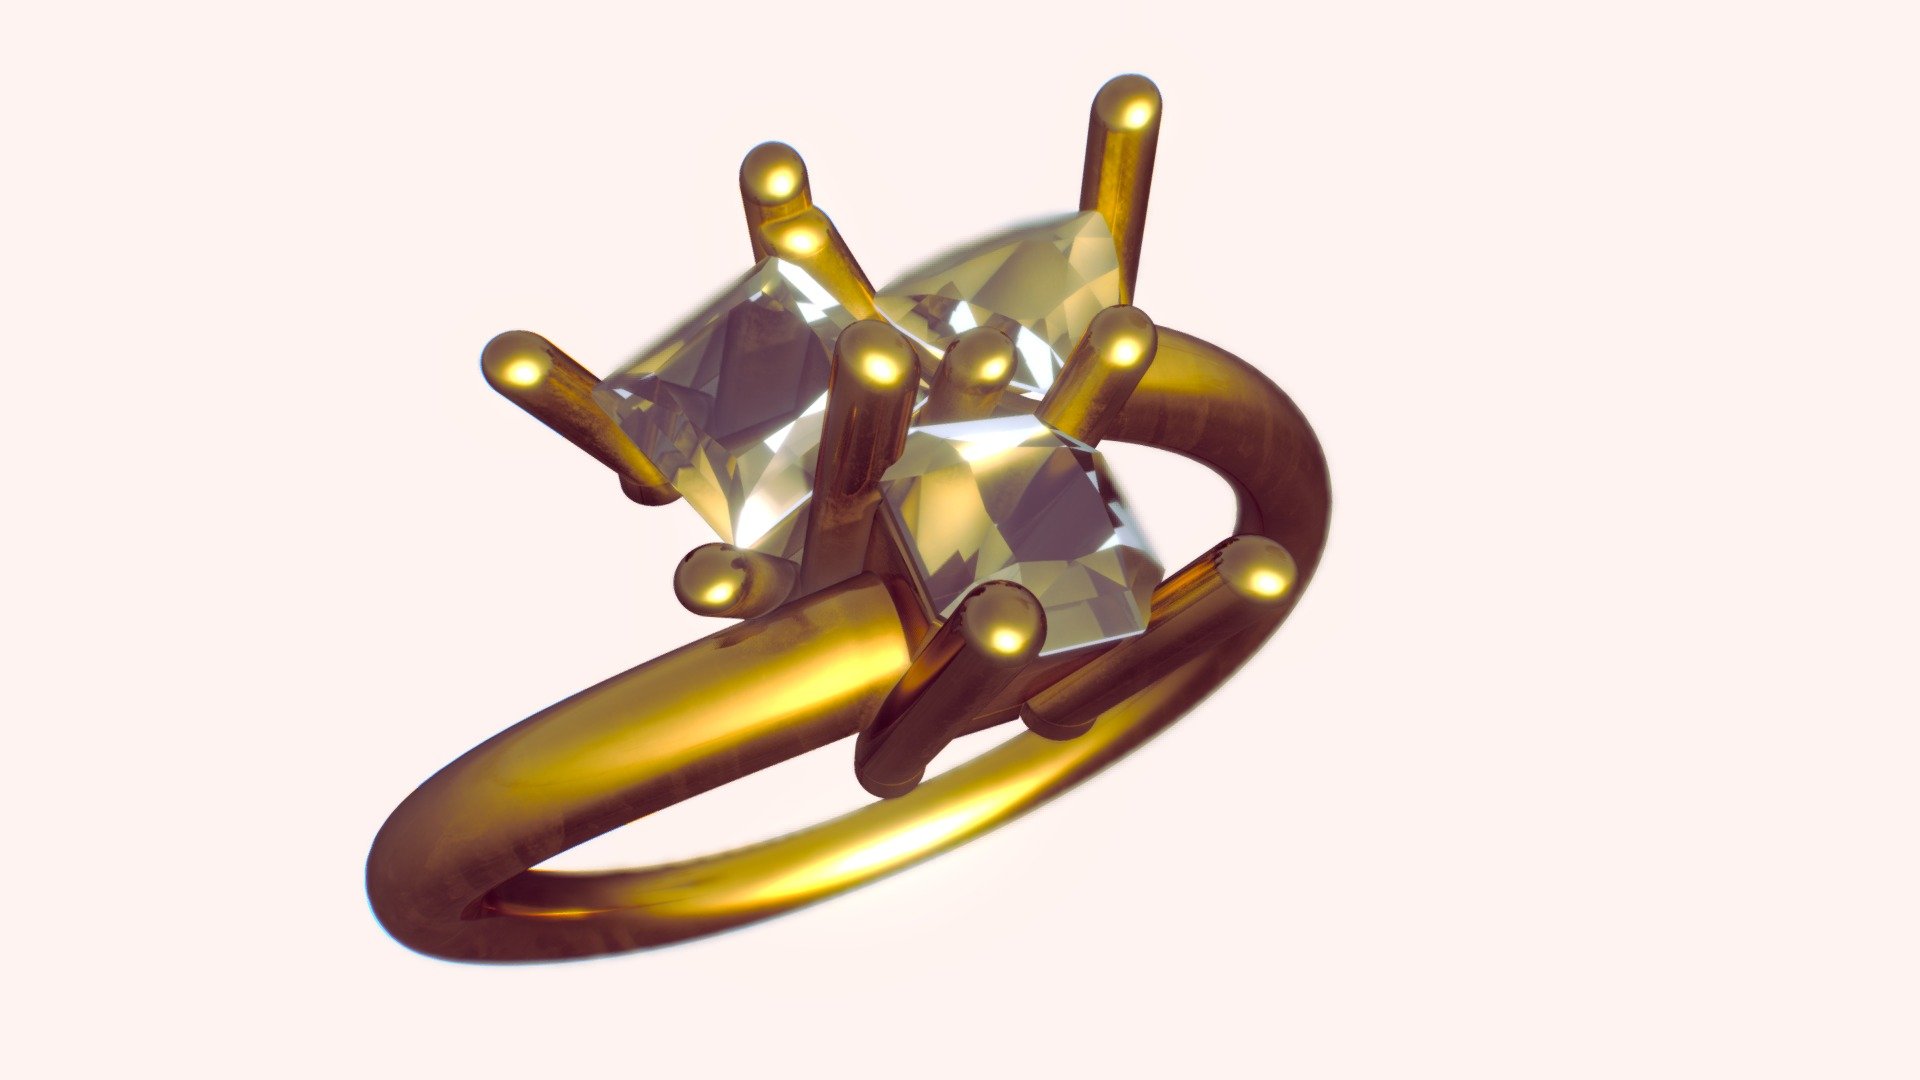 33k tris
Two sets of PBR materials - Golden ring with Dimonds - 3D model by TadenStar 3d model